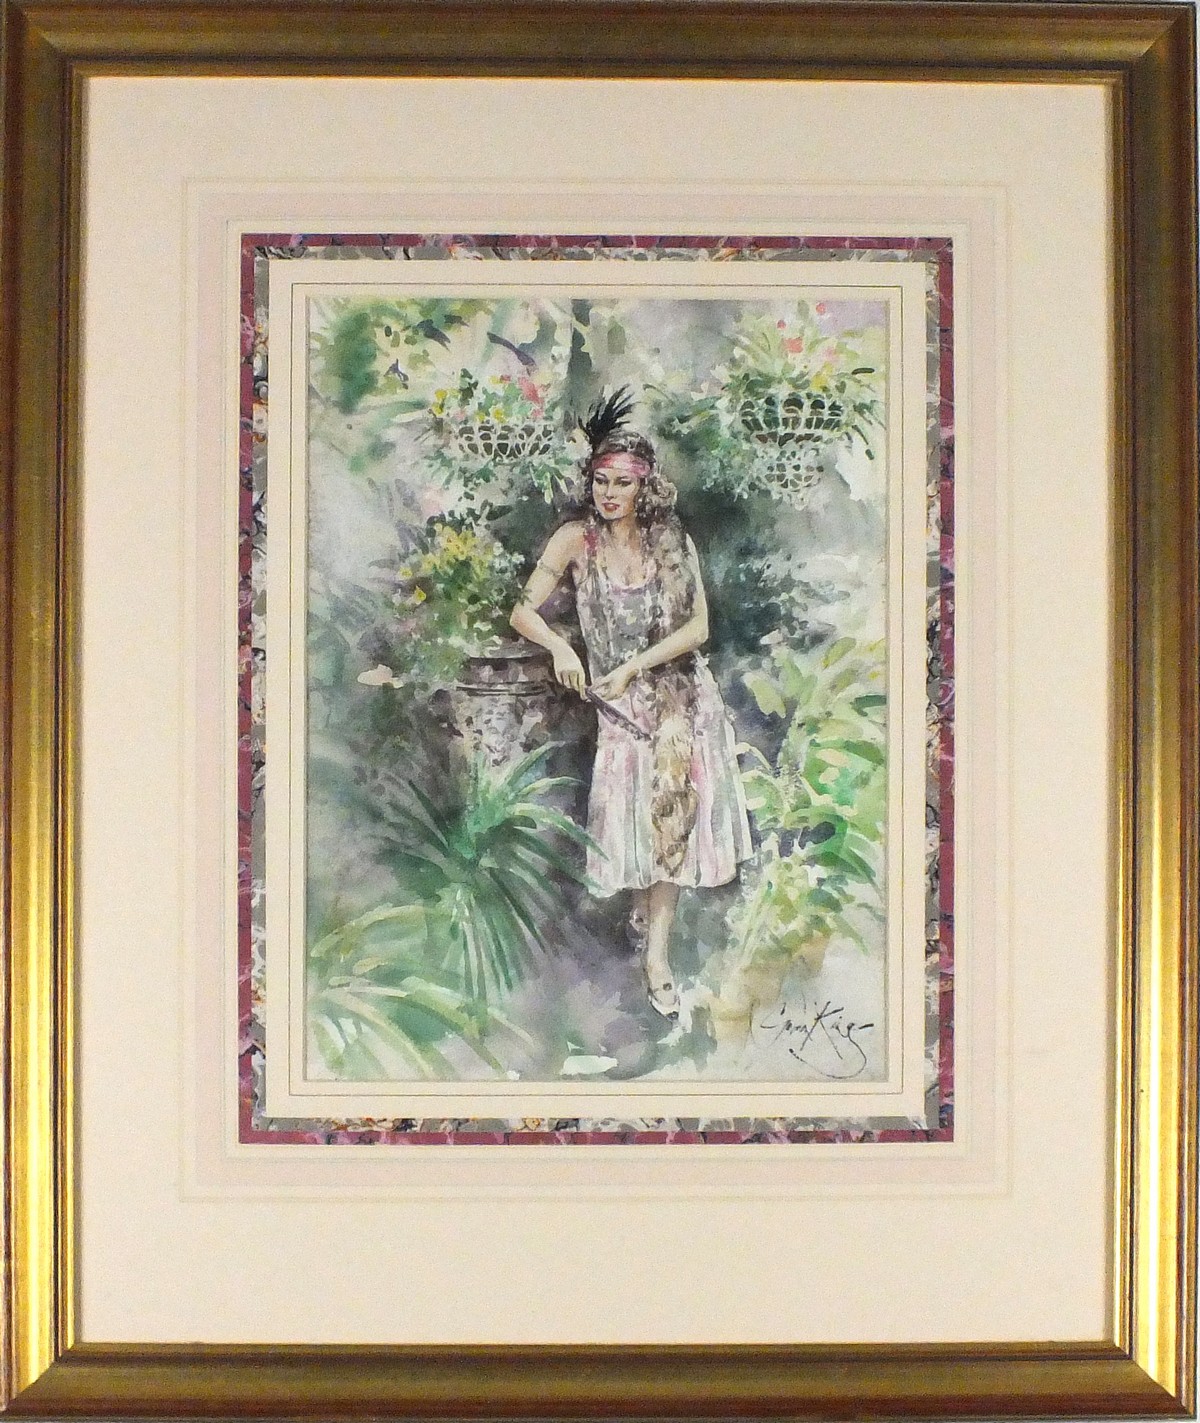 Gordon KING (British b. 1939) Flapper in a Conservatory, Watercolour, Signed lower right, 14.5" x - Image 2 of 2